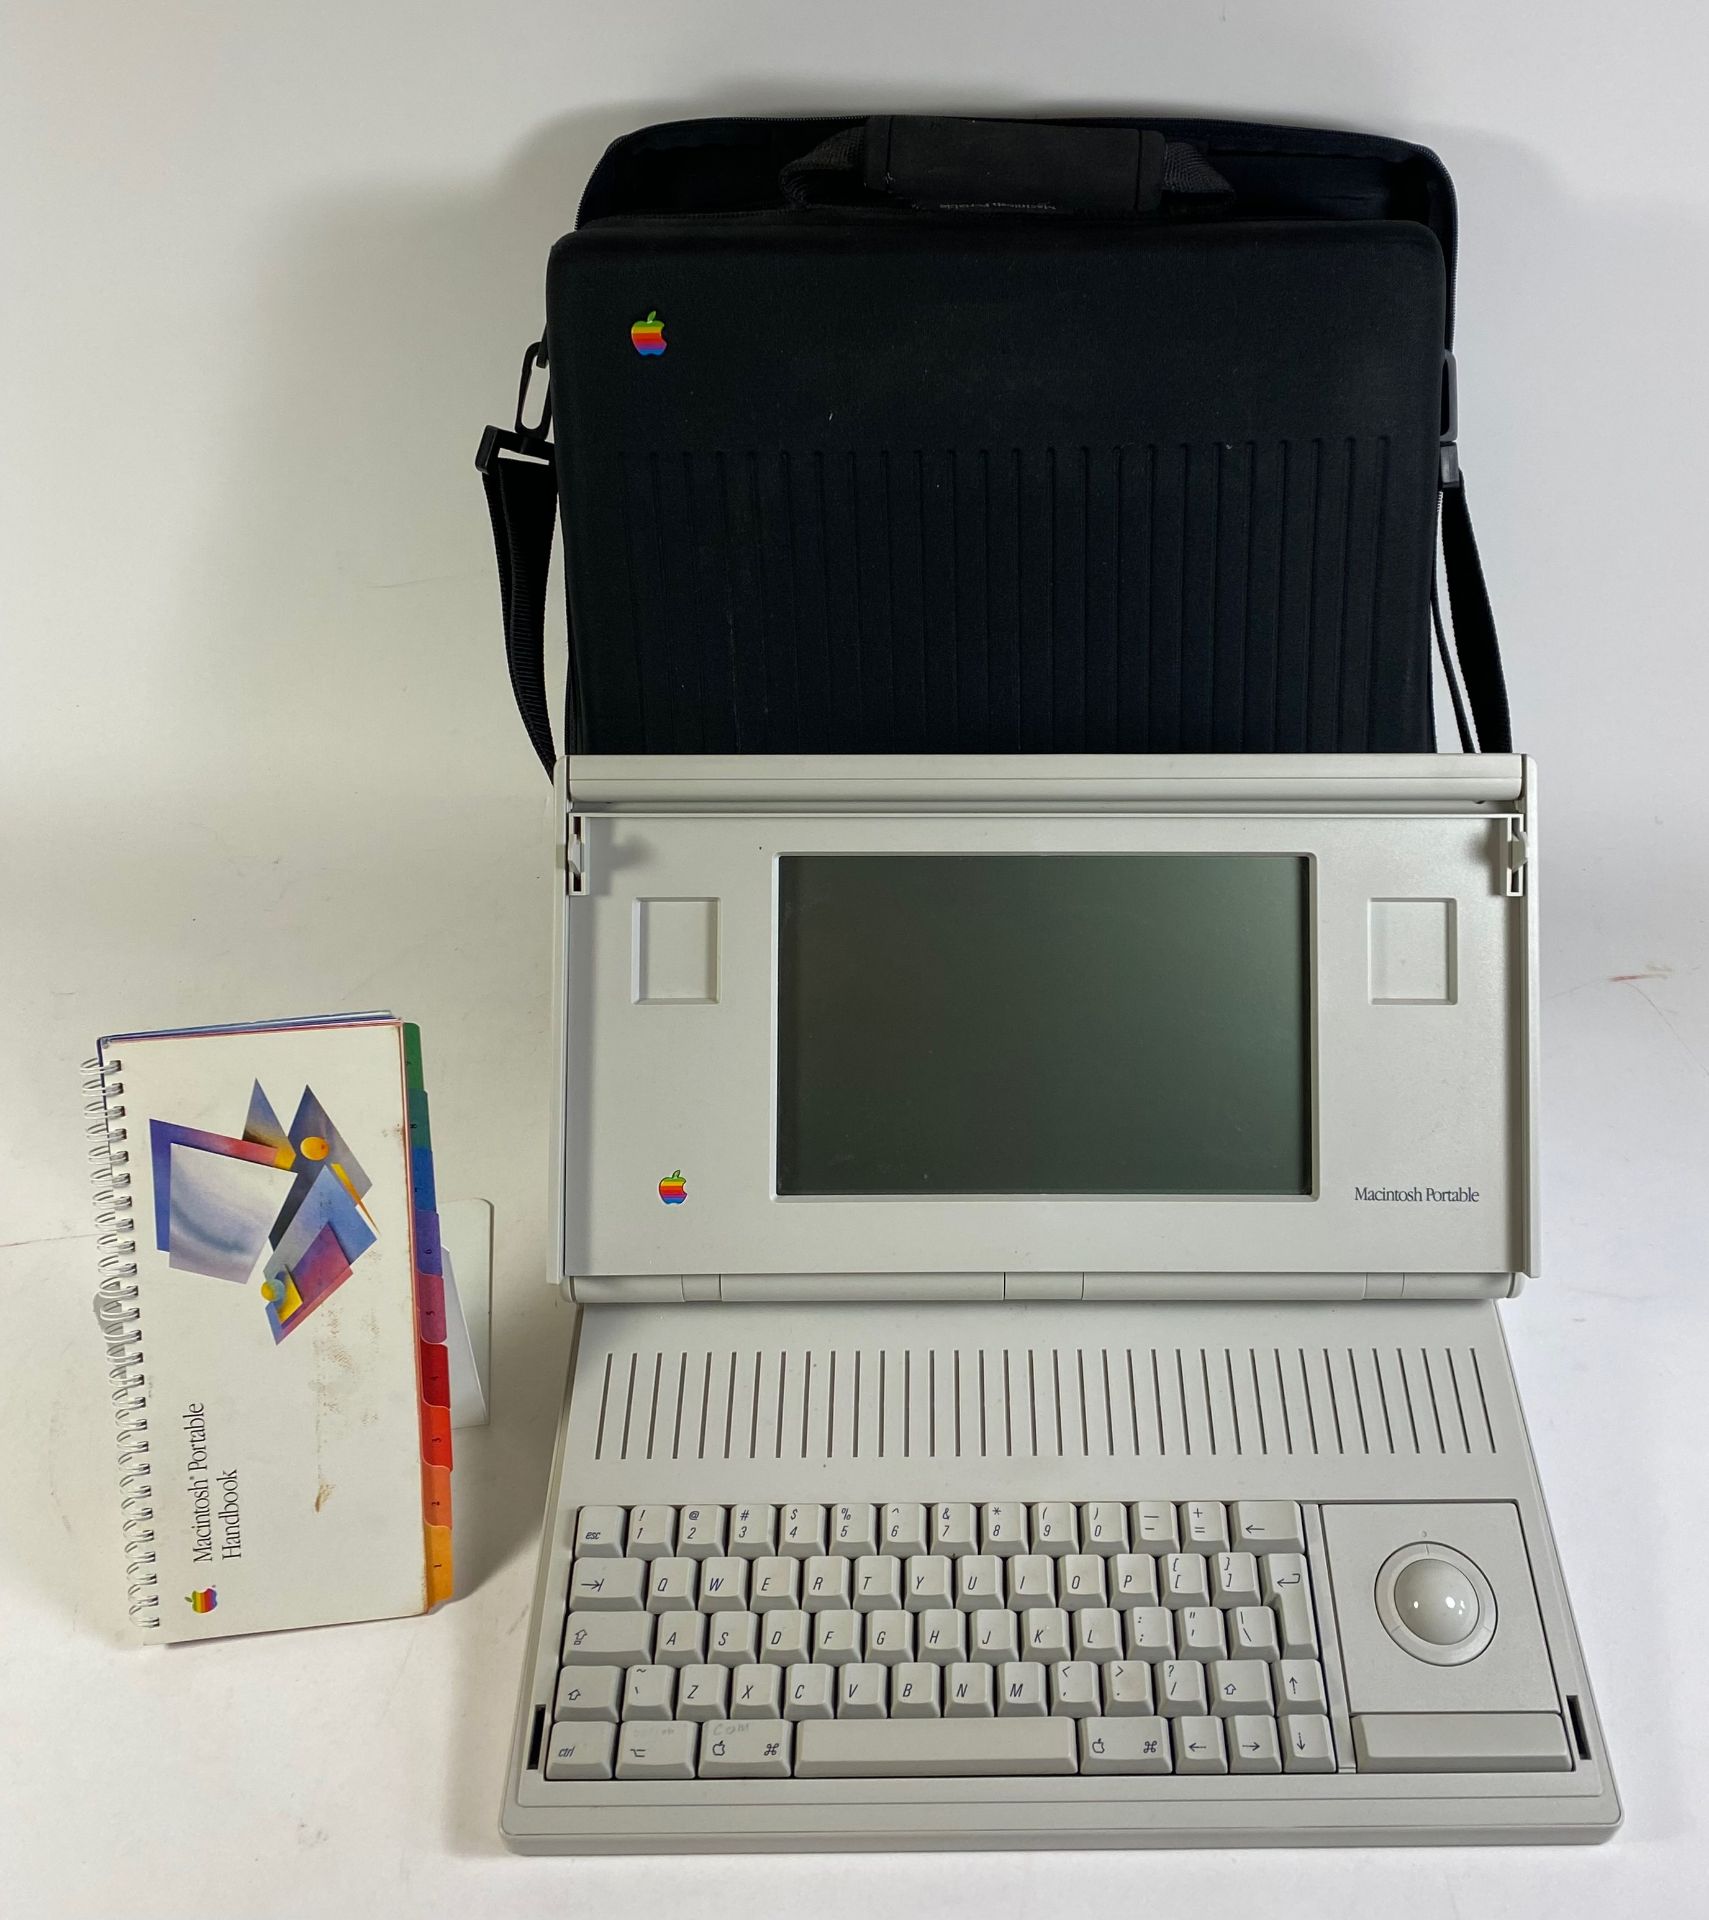 APPLE MACINTOSH PORTABLE M5120 (1989). The first Apple laptop, mains-independent with